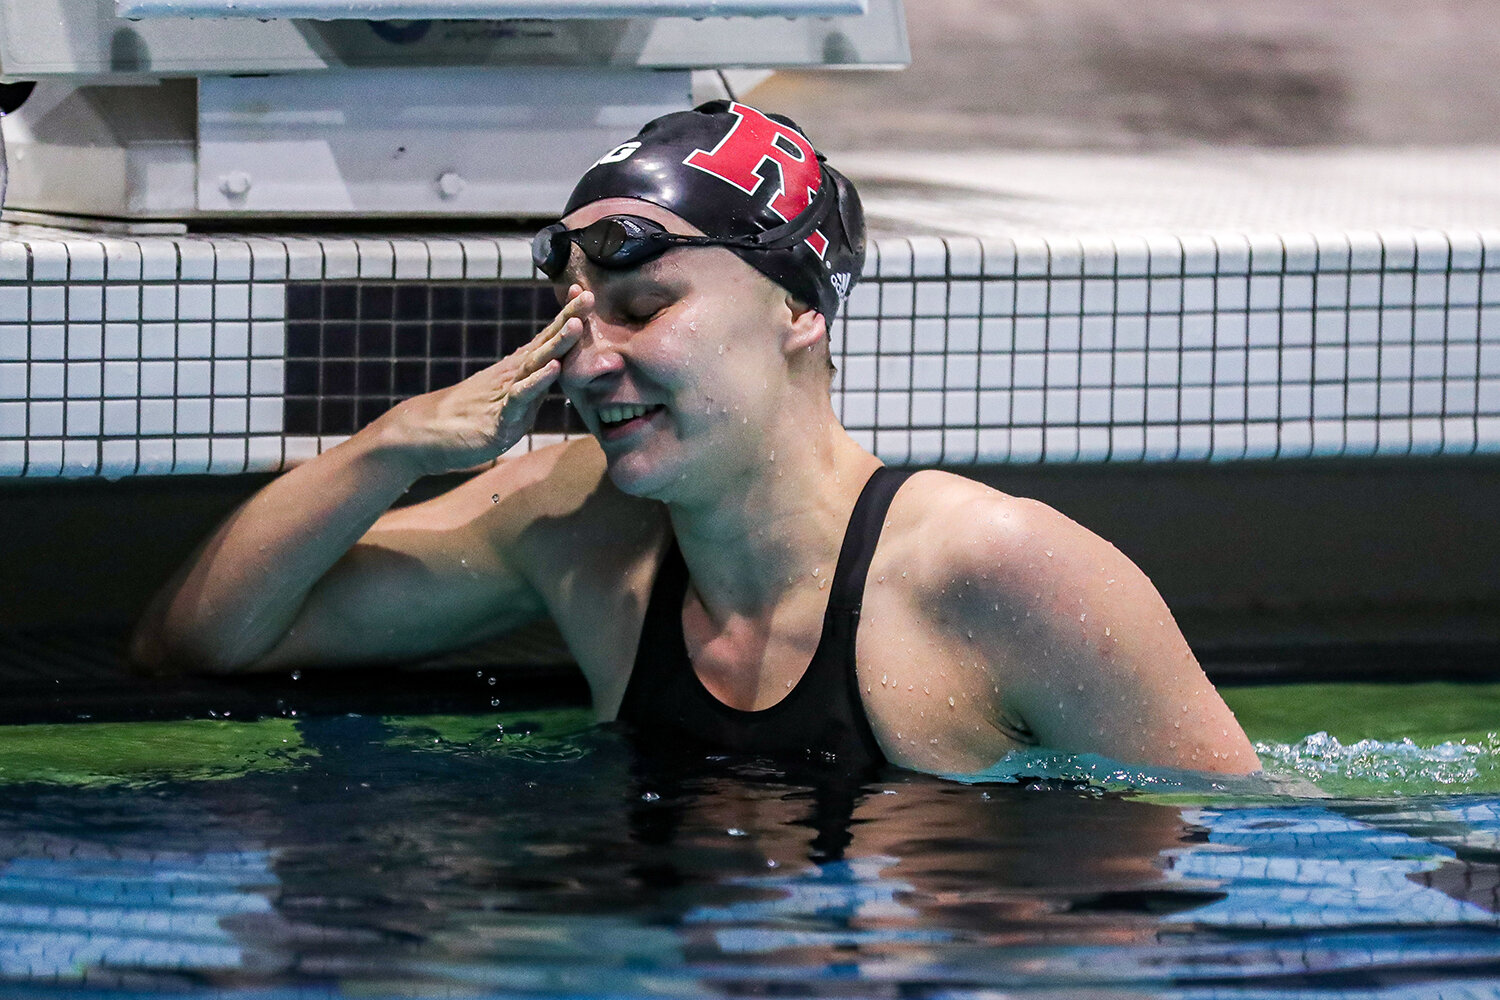  Tereza Grusova reacts after taking second place in the 100 Yard Backstroke during the Big Ten Women’s Swimming and Diving Championships at the Campus Welfare and Recreation Center in Iowa City, IA on Friday, Feb. 21, 2020.  